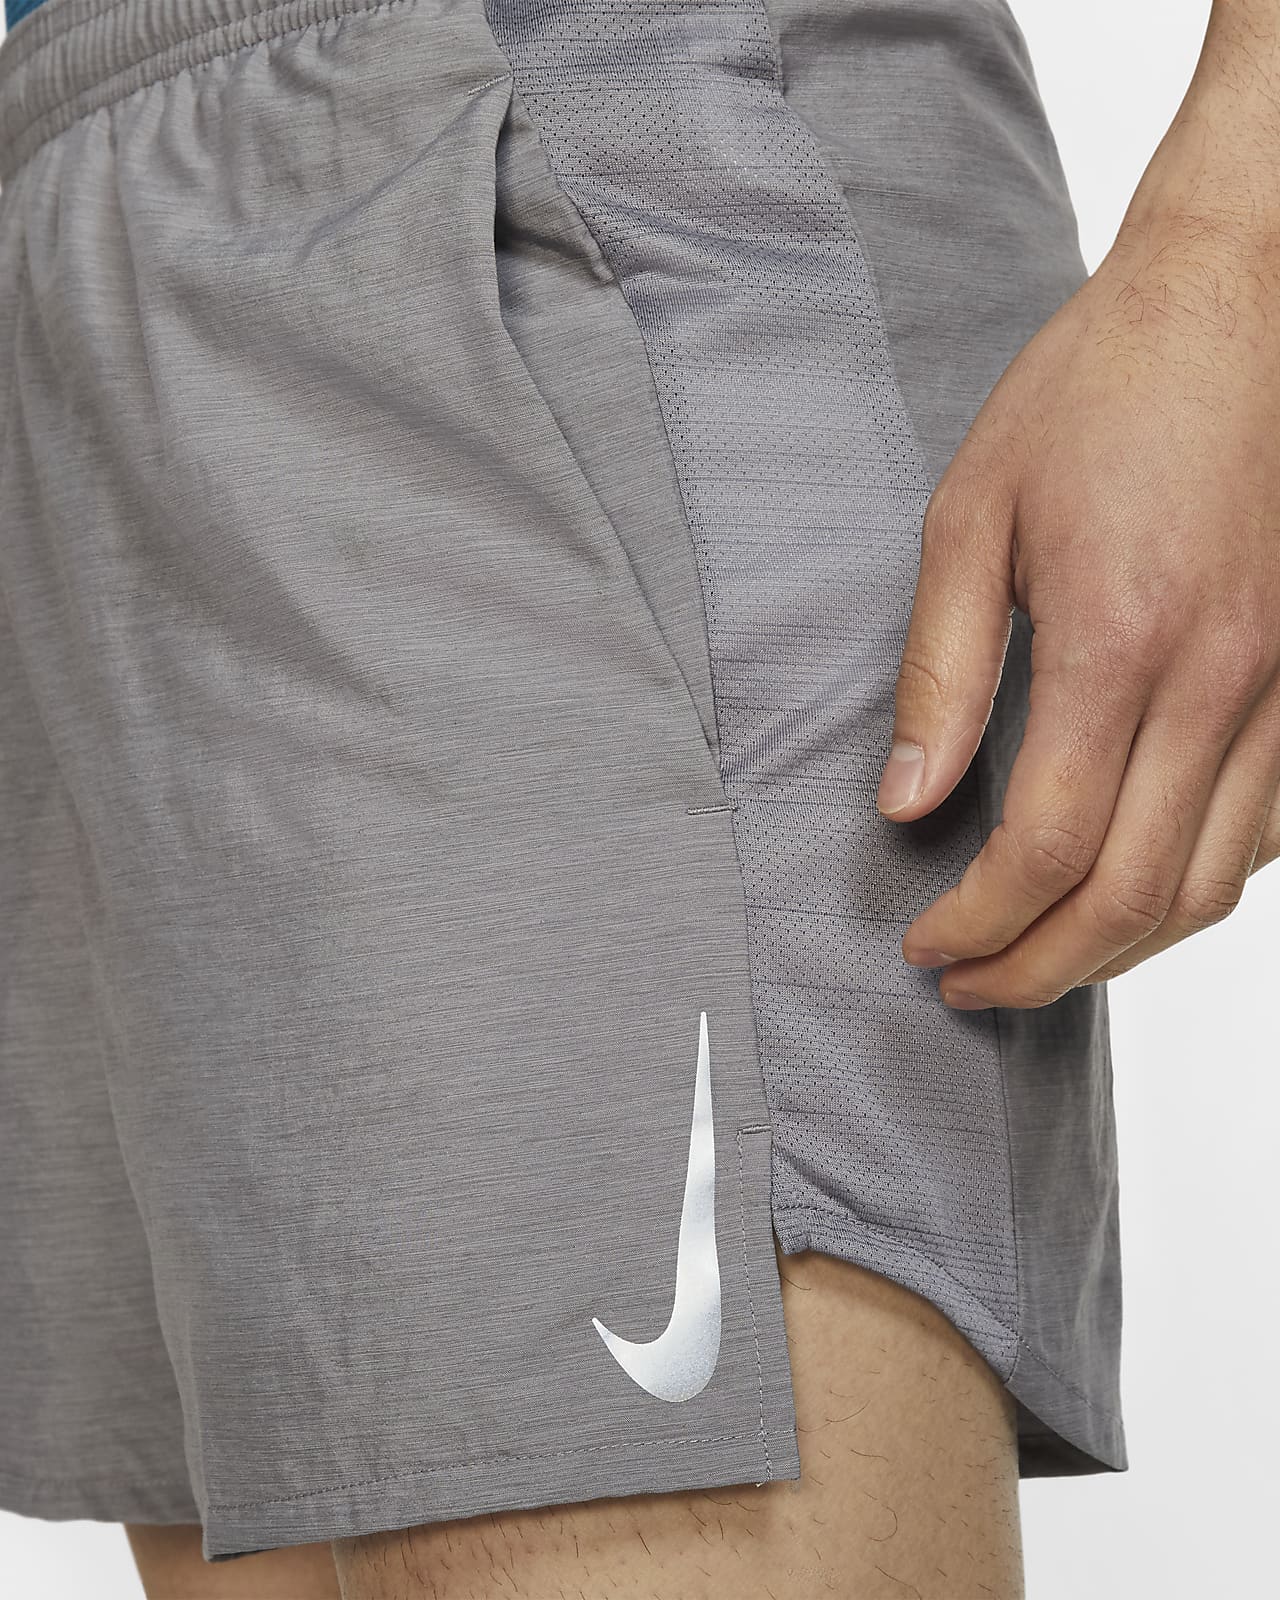 nike 7 inch challenger shorts